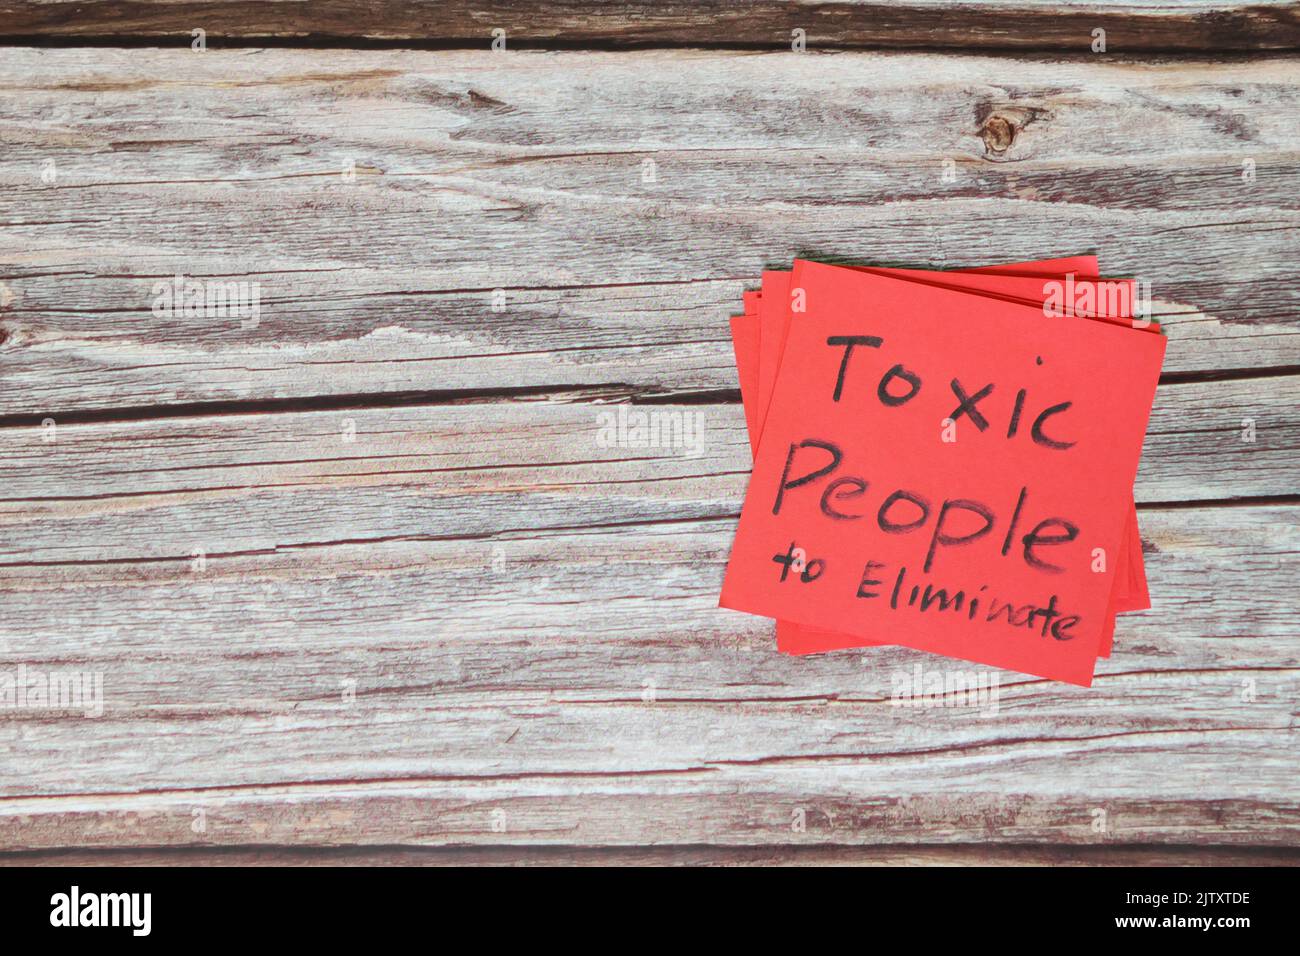 List of toxic people to eliminate concept. Red sticky note in wooden background with copy space. Stock Photo